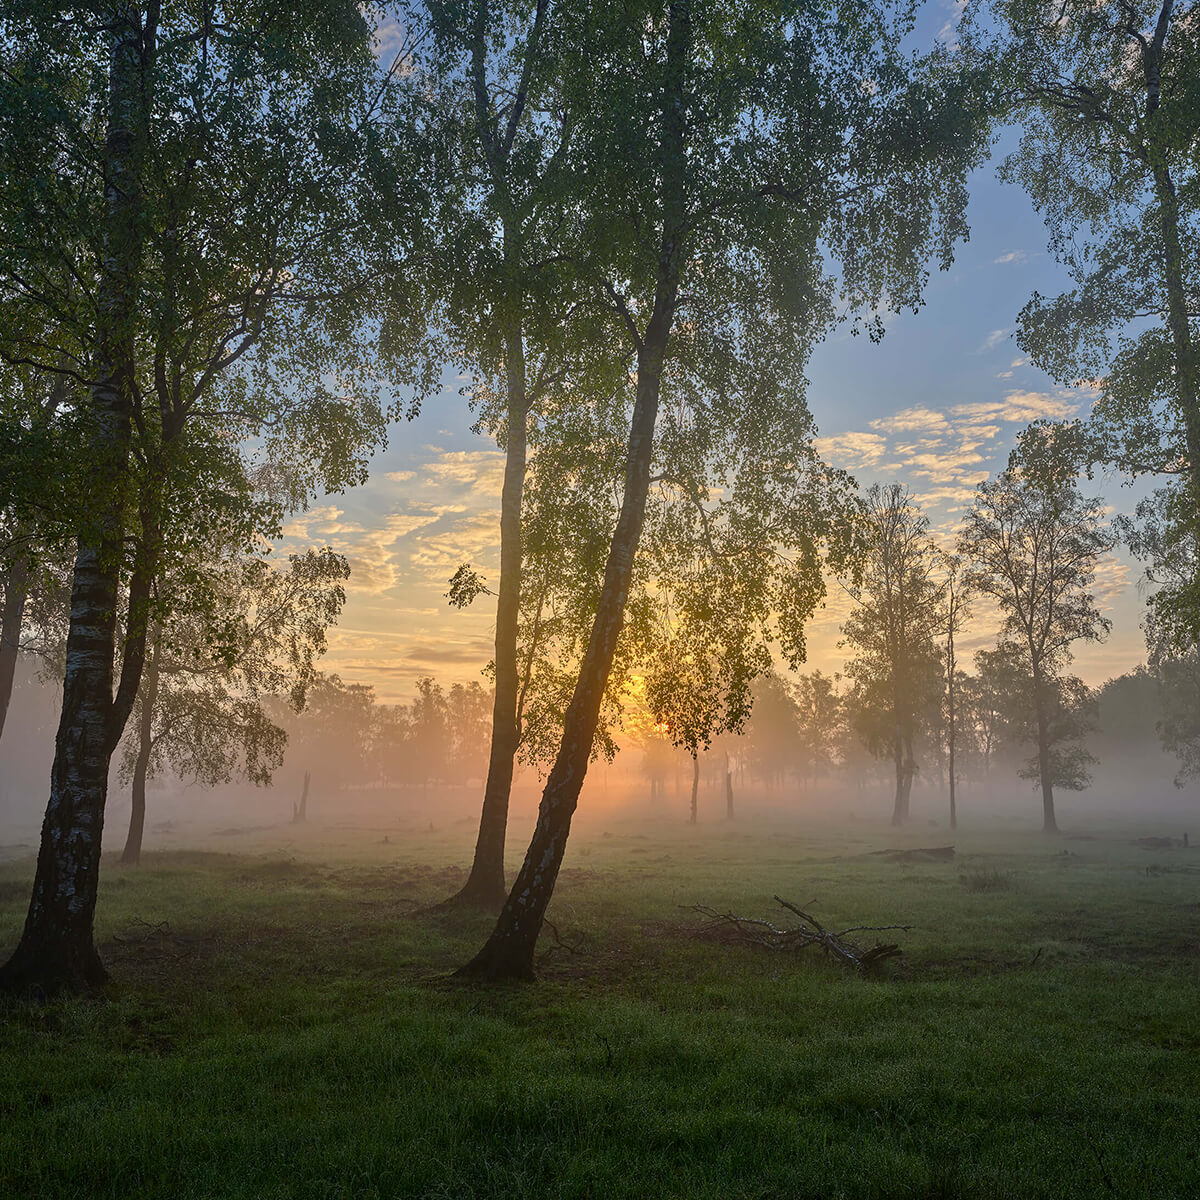 Sunrise by the birches